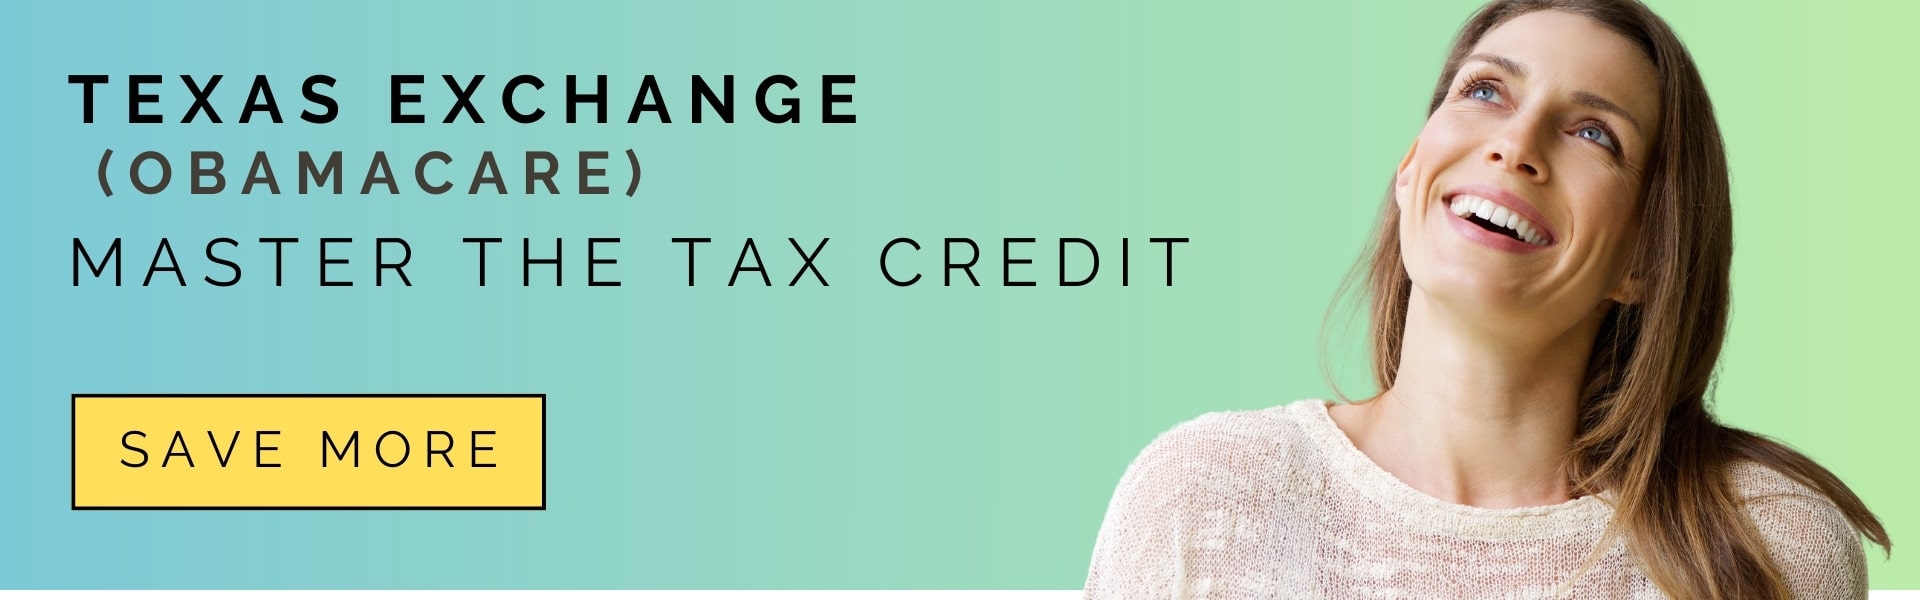 Maximizing tax credits on Texas health exchange plans - Tips for choosing the right coverage.